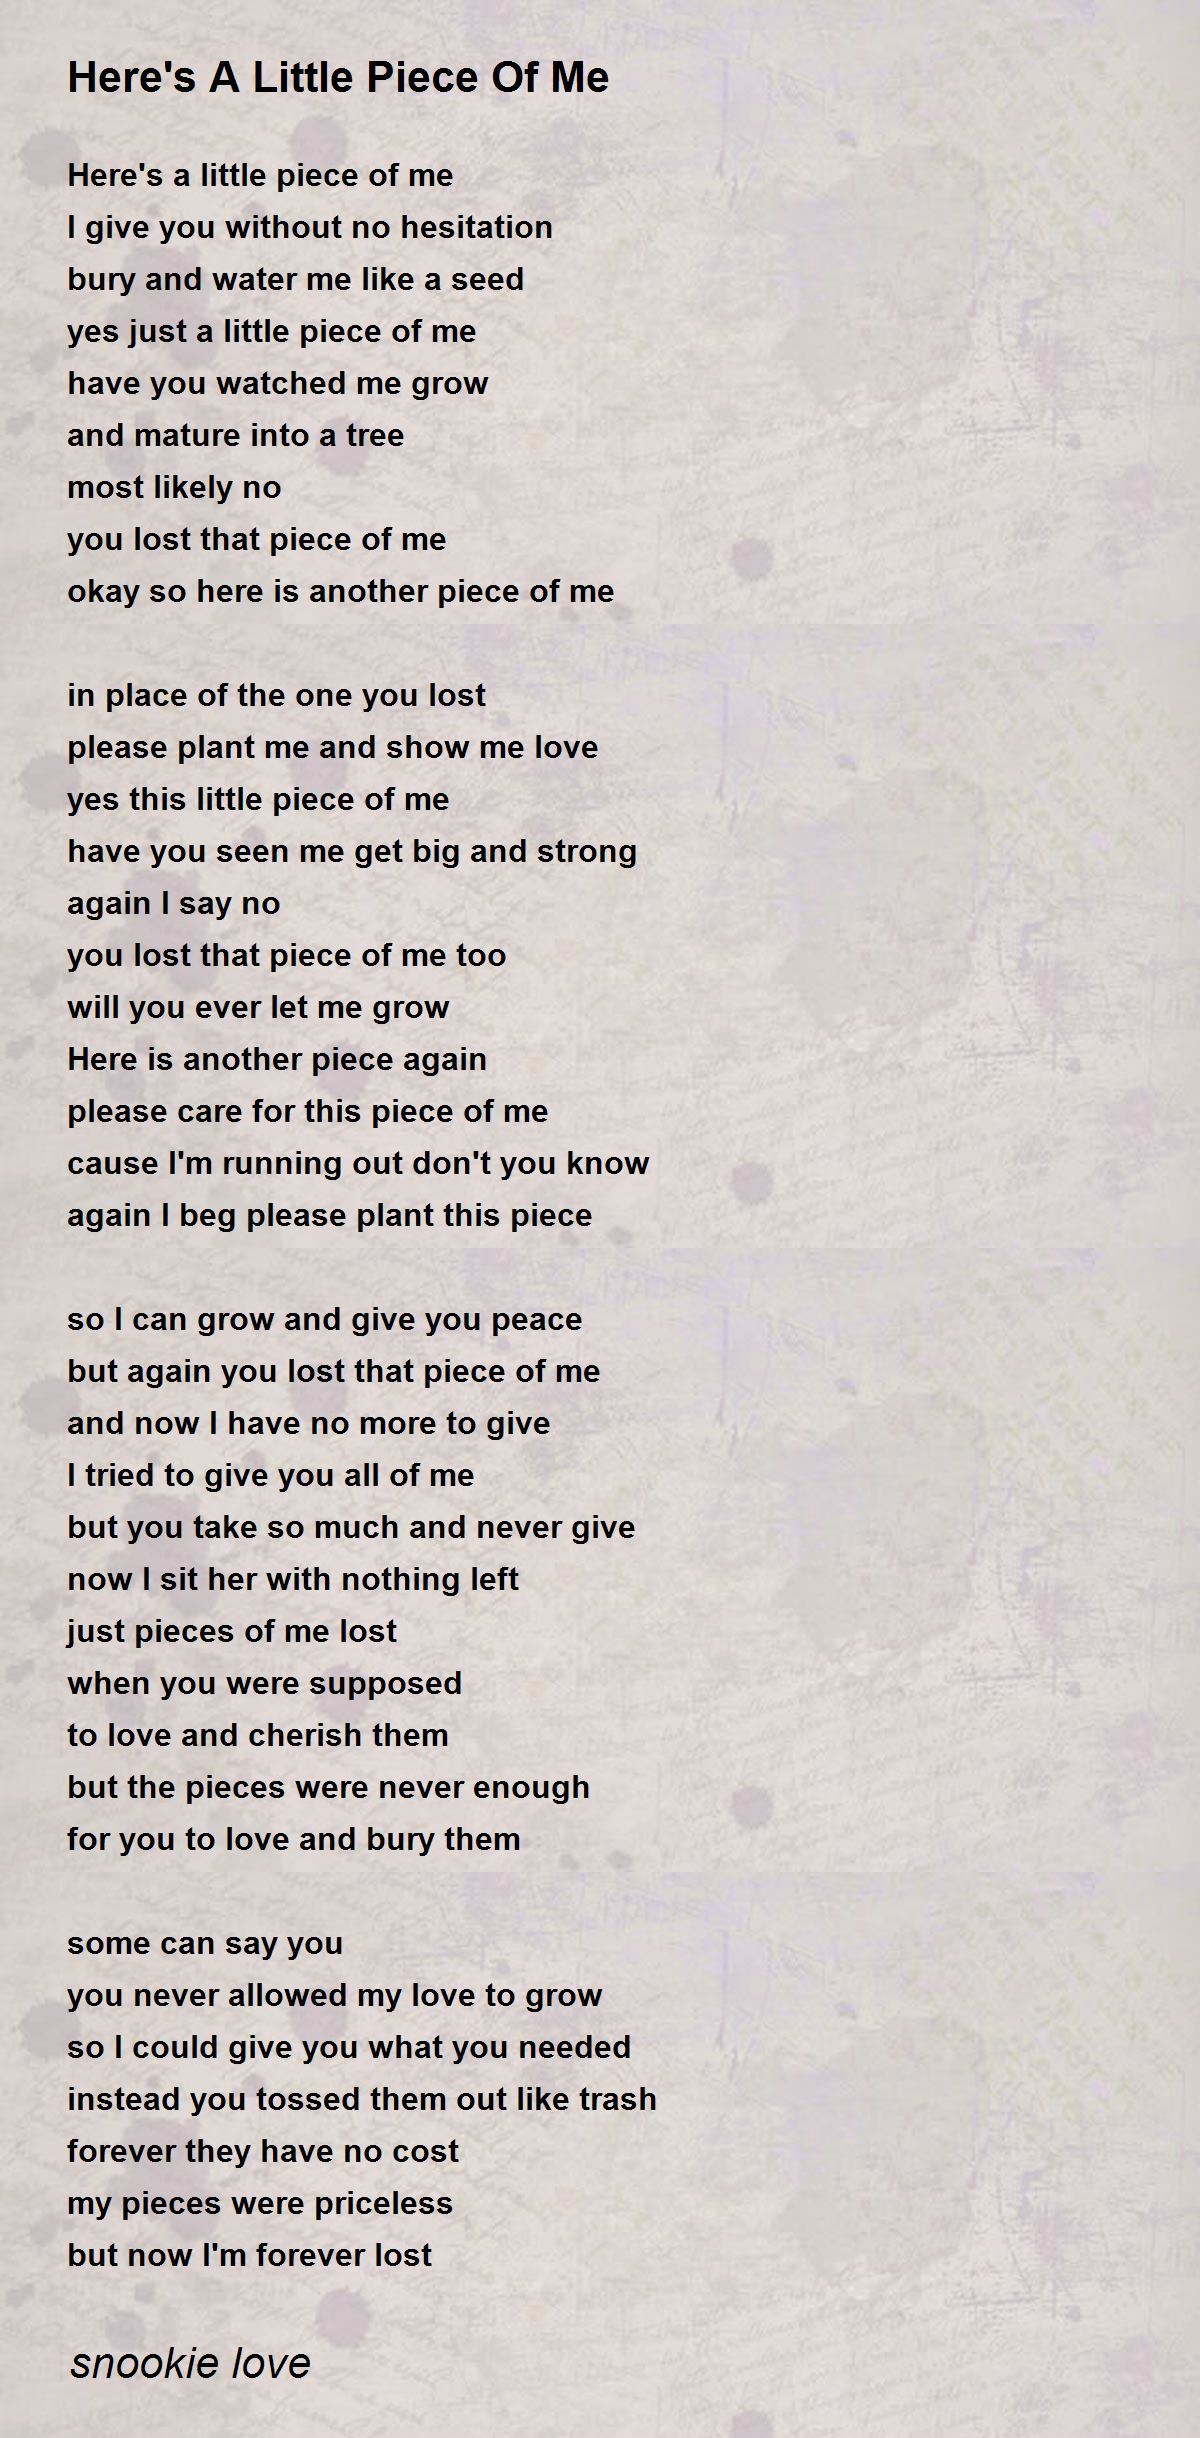 Here's A Little Piece Of Me - Here's A Little Piece Of Me Poem by snookie  love